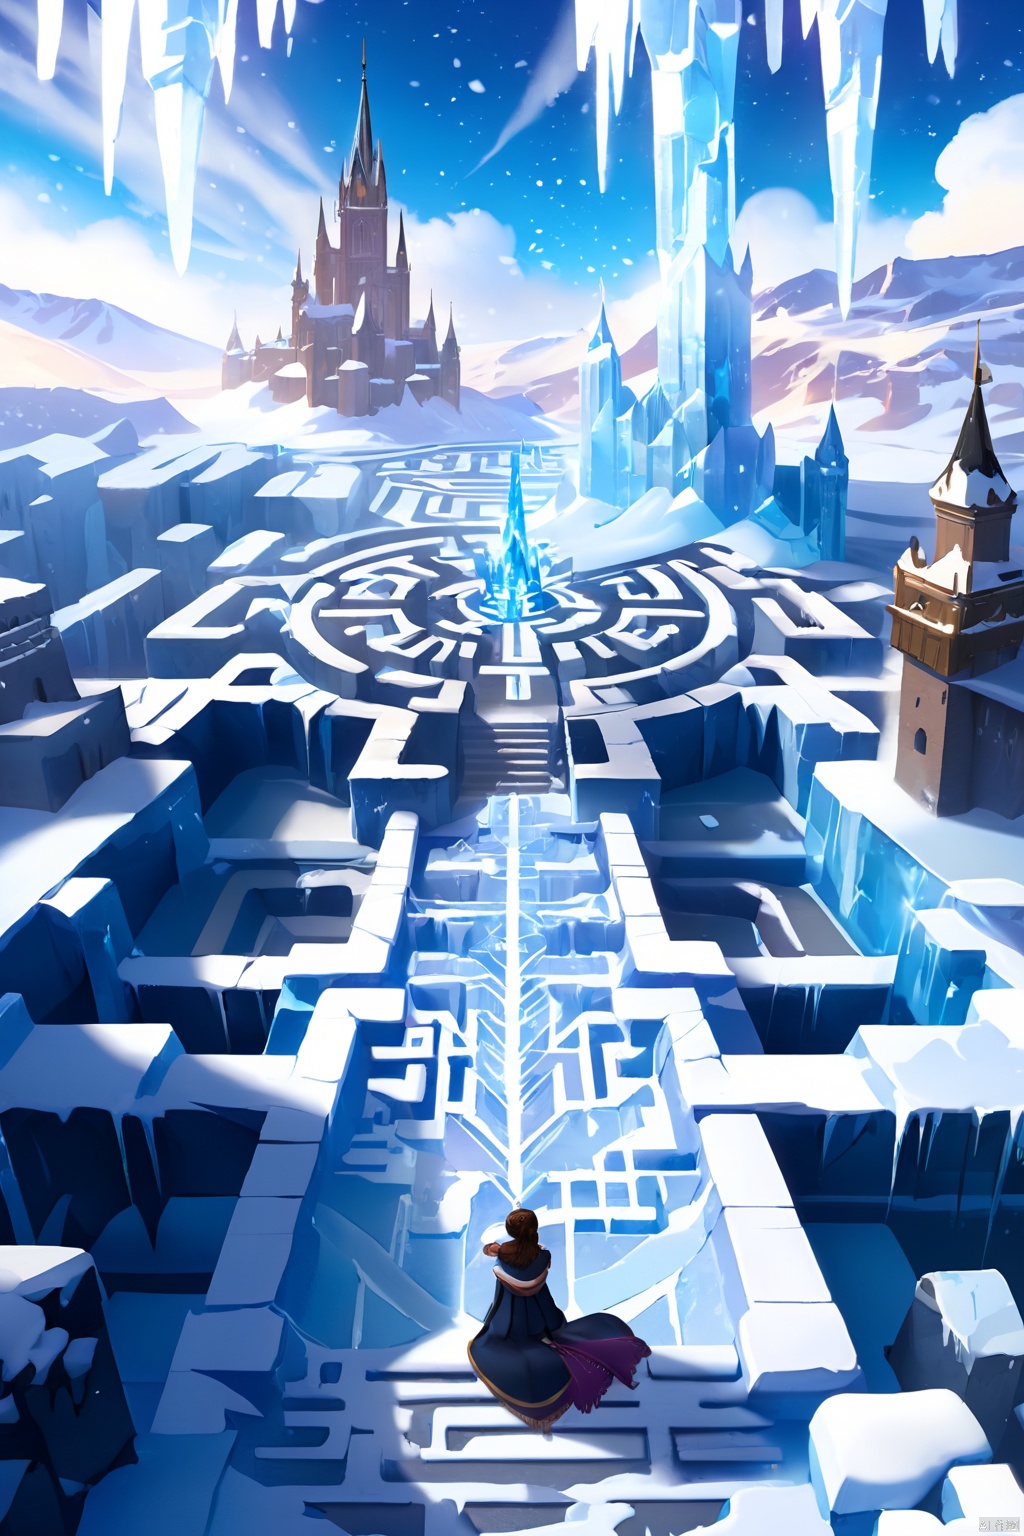  A frozen labyrinth of ice and icicles formed an intricate labyrinth structure. On the walls of the labyrinth, ice crystals hung from the ice, giving off a cold glow，Snowy city center.
BREAK
A black-haired woman sits alone, wearing a blue coat with a white, fluffy collar. She smiles warmly, looking up at the sky. Her eyes are blue, reflecting the sky. She seems nostalgic or hopeful.
BREAK
Skyscrapers tower over the street, where cars and people come and go. She spends her time quietly, in contrast to the hustle and bustle of the city.
BREAK
The snow falls, creating a white carpet around her. The snow accumulates on her skin and clothes, but she doesn't mind. She likes this place, where she can listen to her heart and get closer to her dreams.
BREAK
She doesn't move yet. She still looks at the sky. She still looks beautiful.
